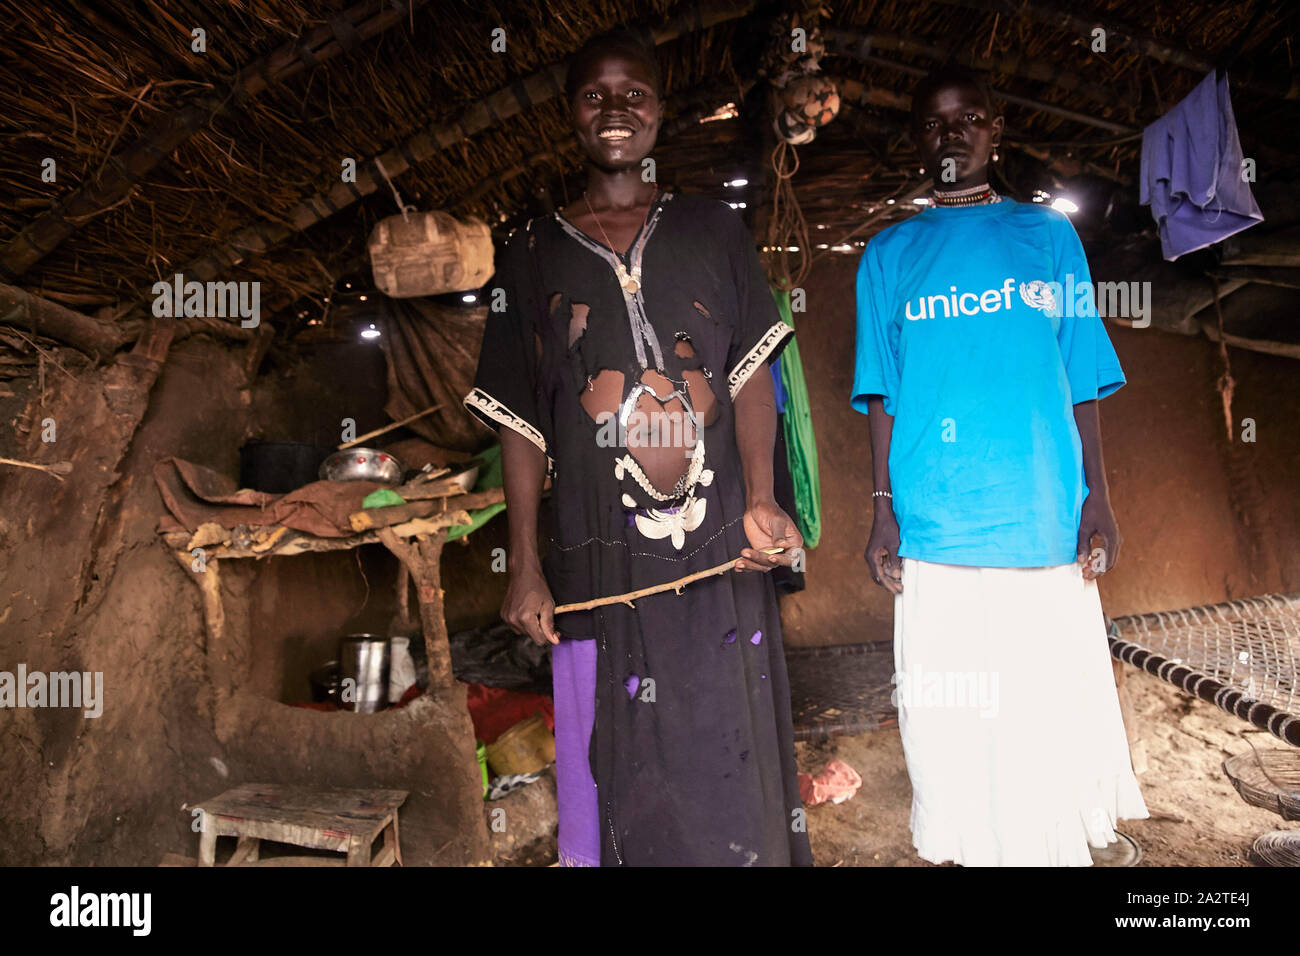 South Sudan Maban Refugees in there tents. Woman with very old dress  Photo Jaco Klamer15-03-2016 Stock Photo